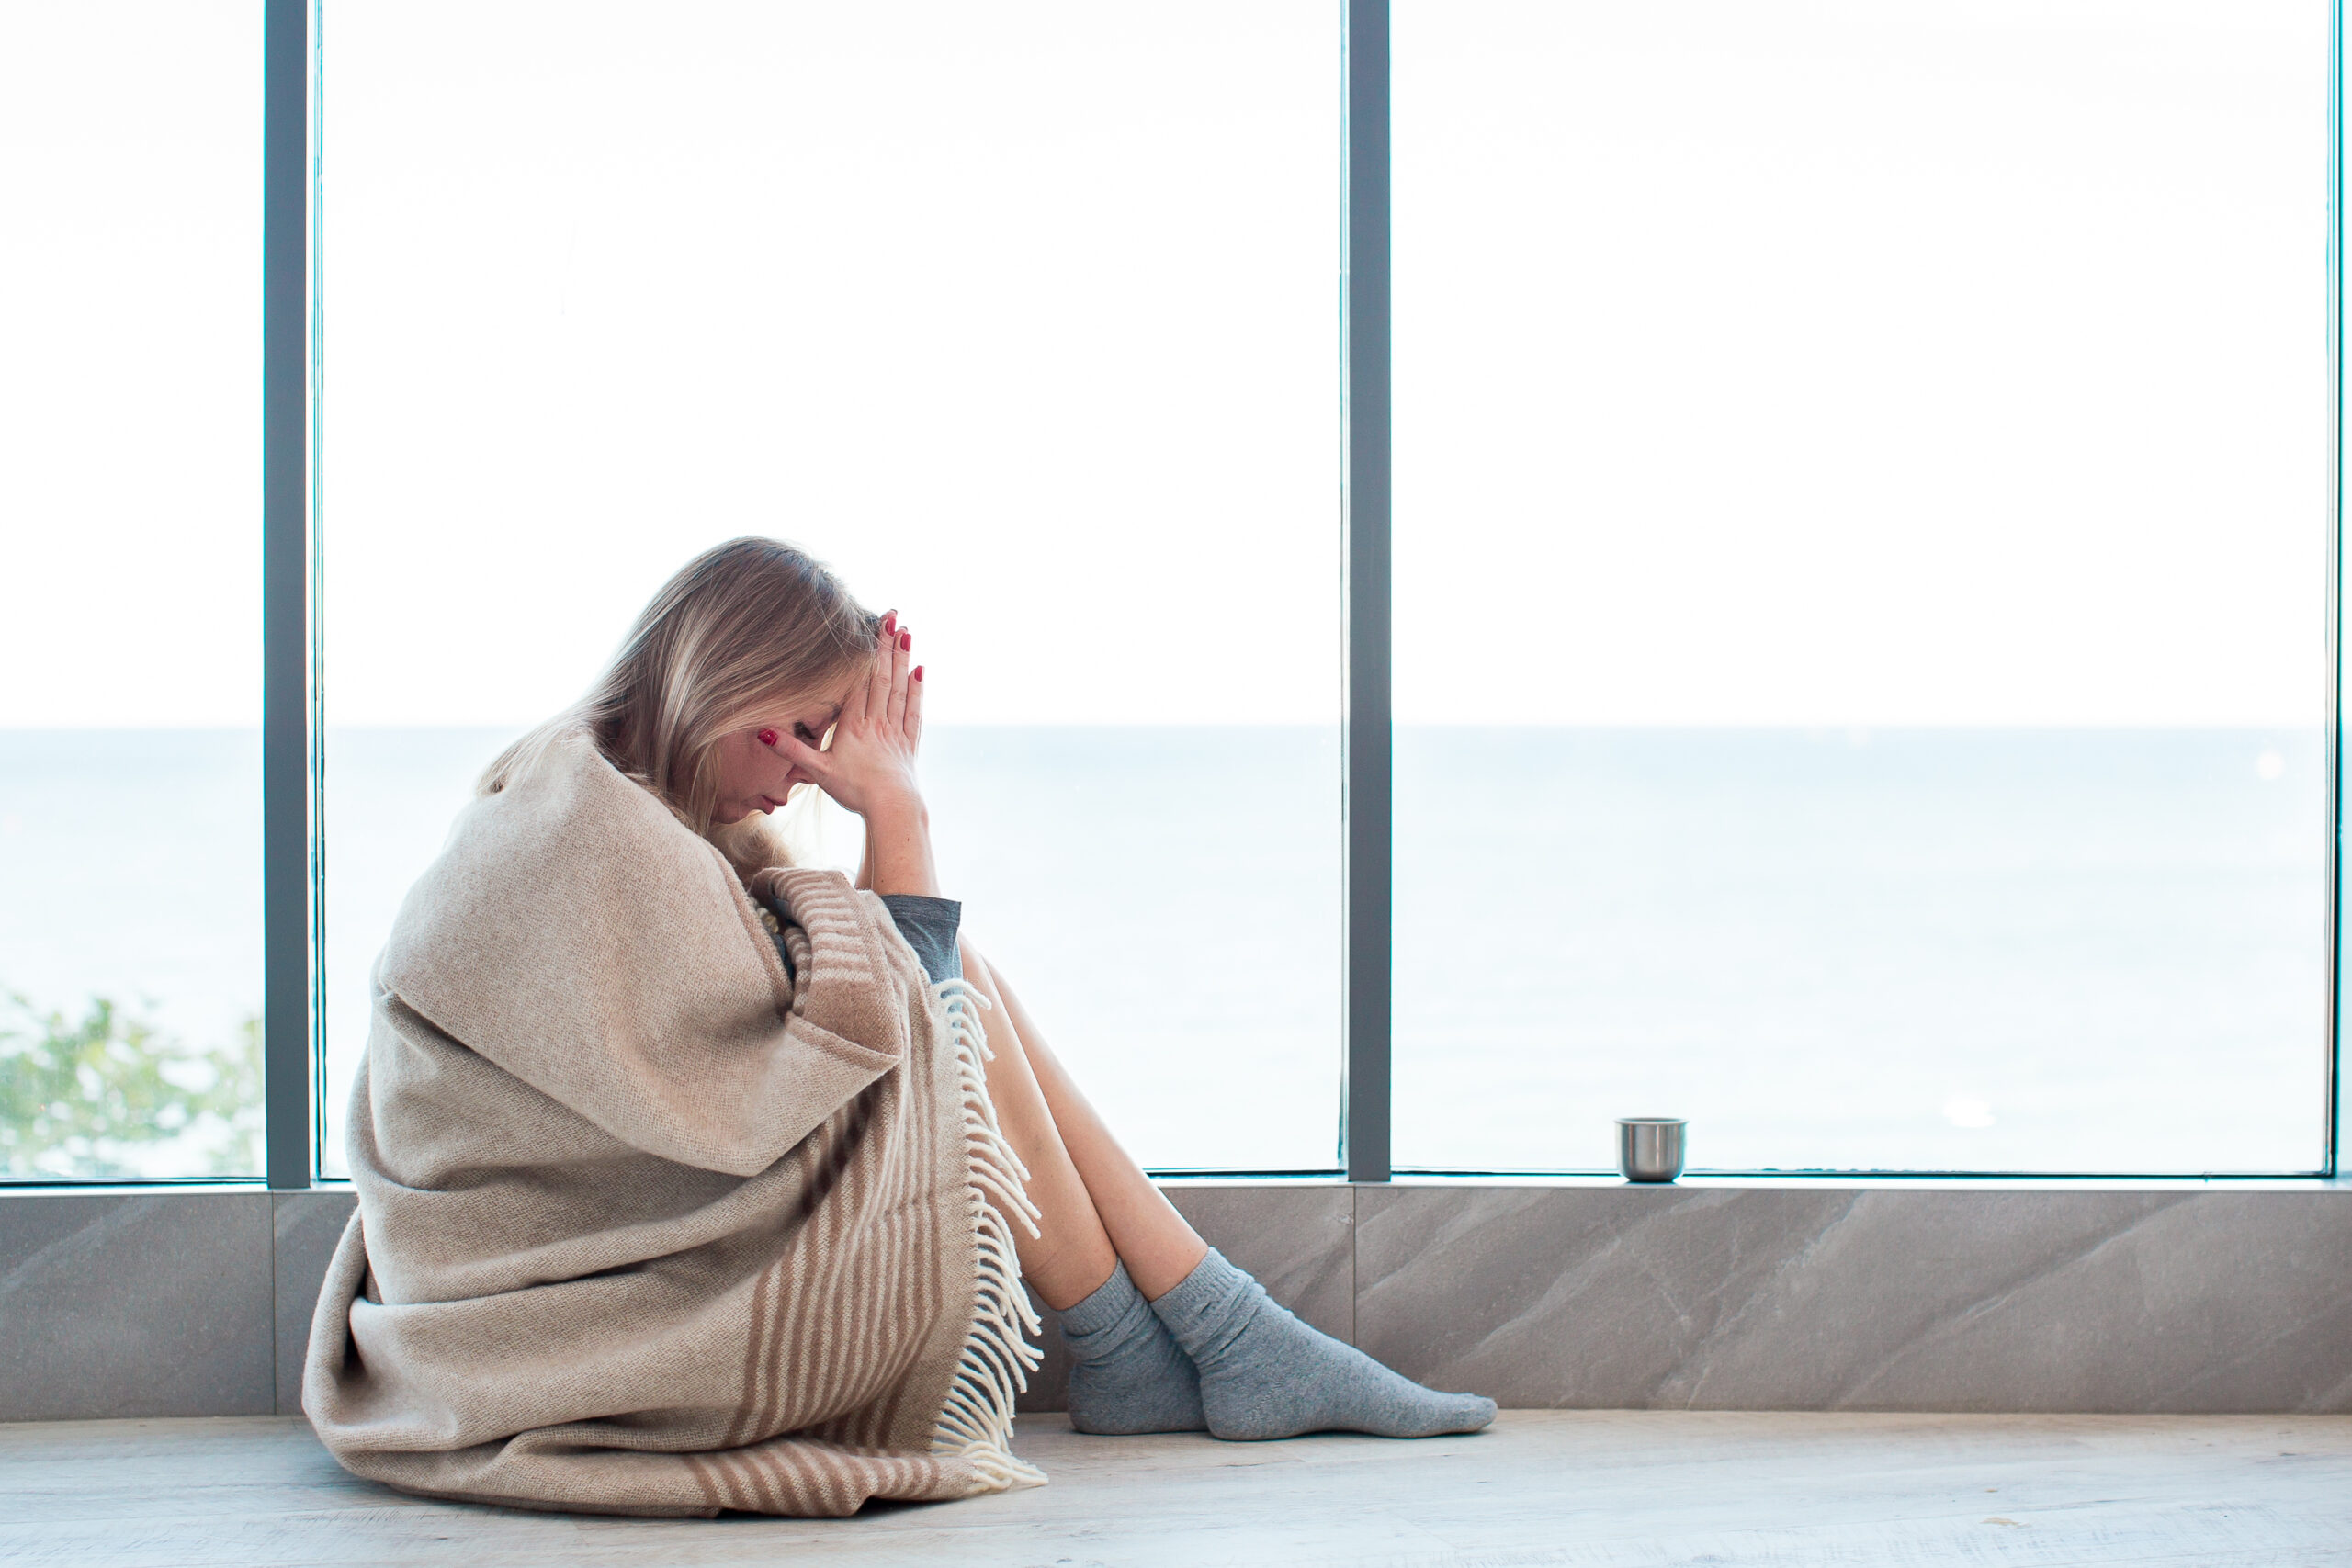 Woman in warm socks sitting on a floor near large window wrapped in a blanket, holding her head, having a strong headache.